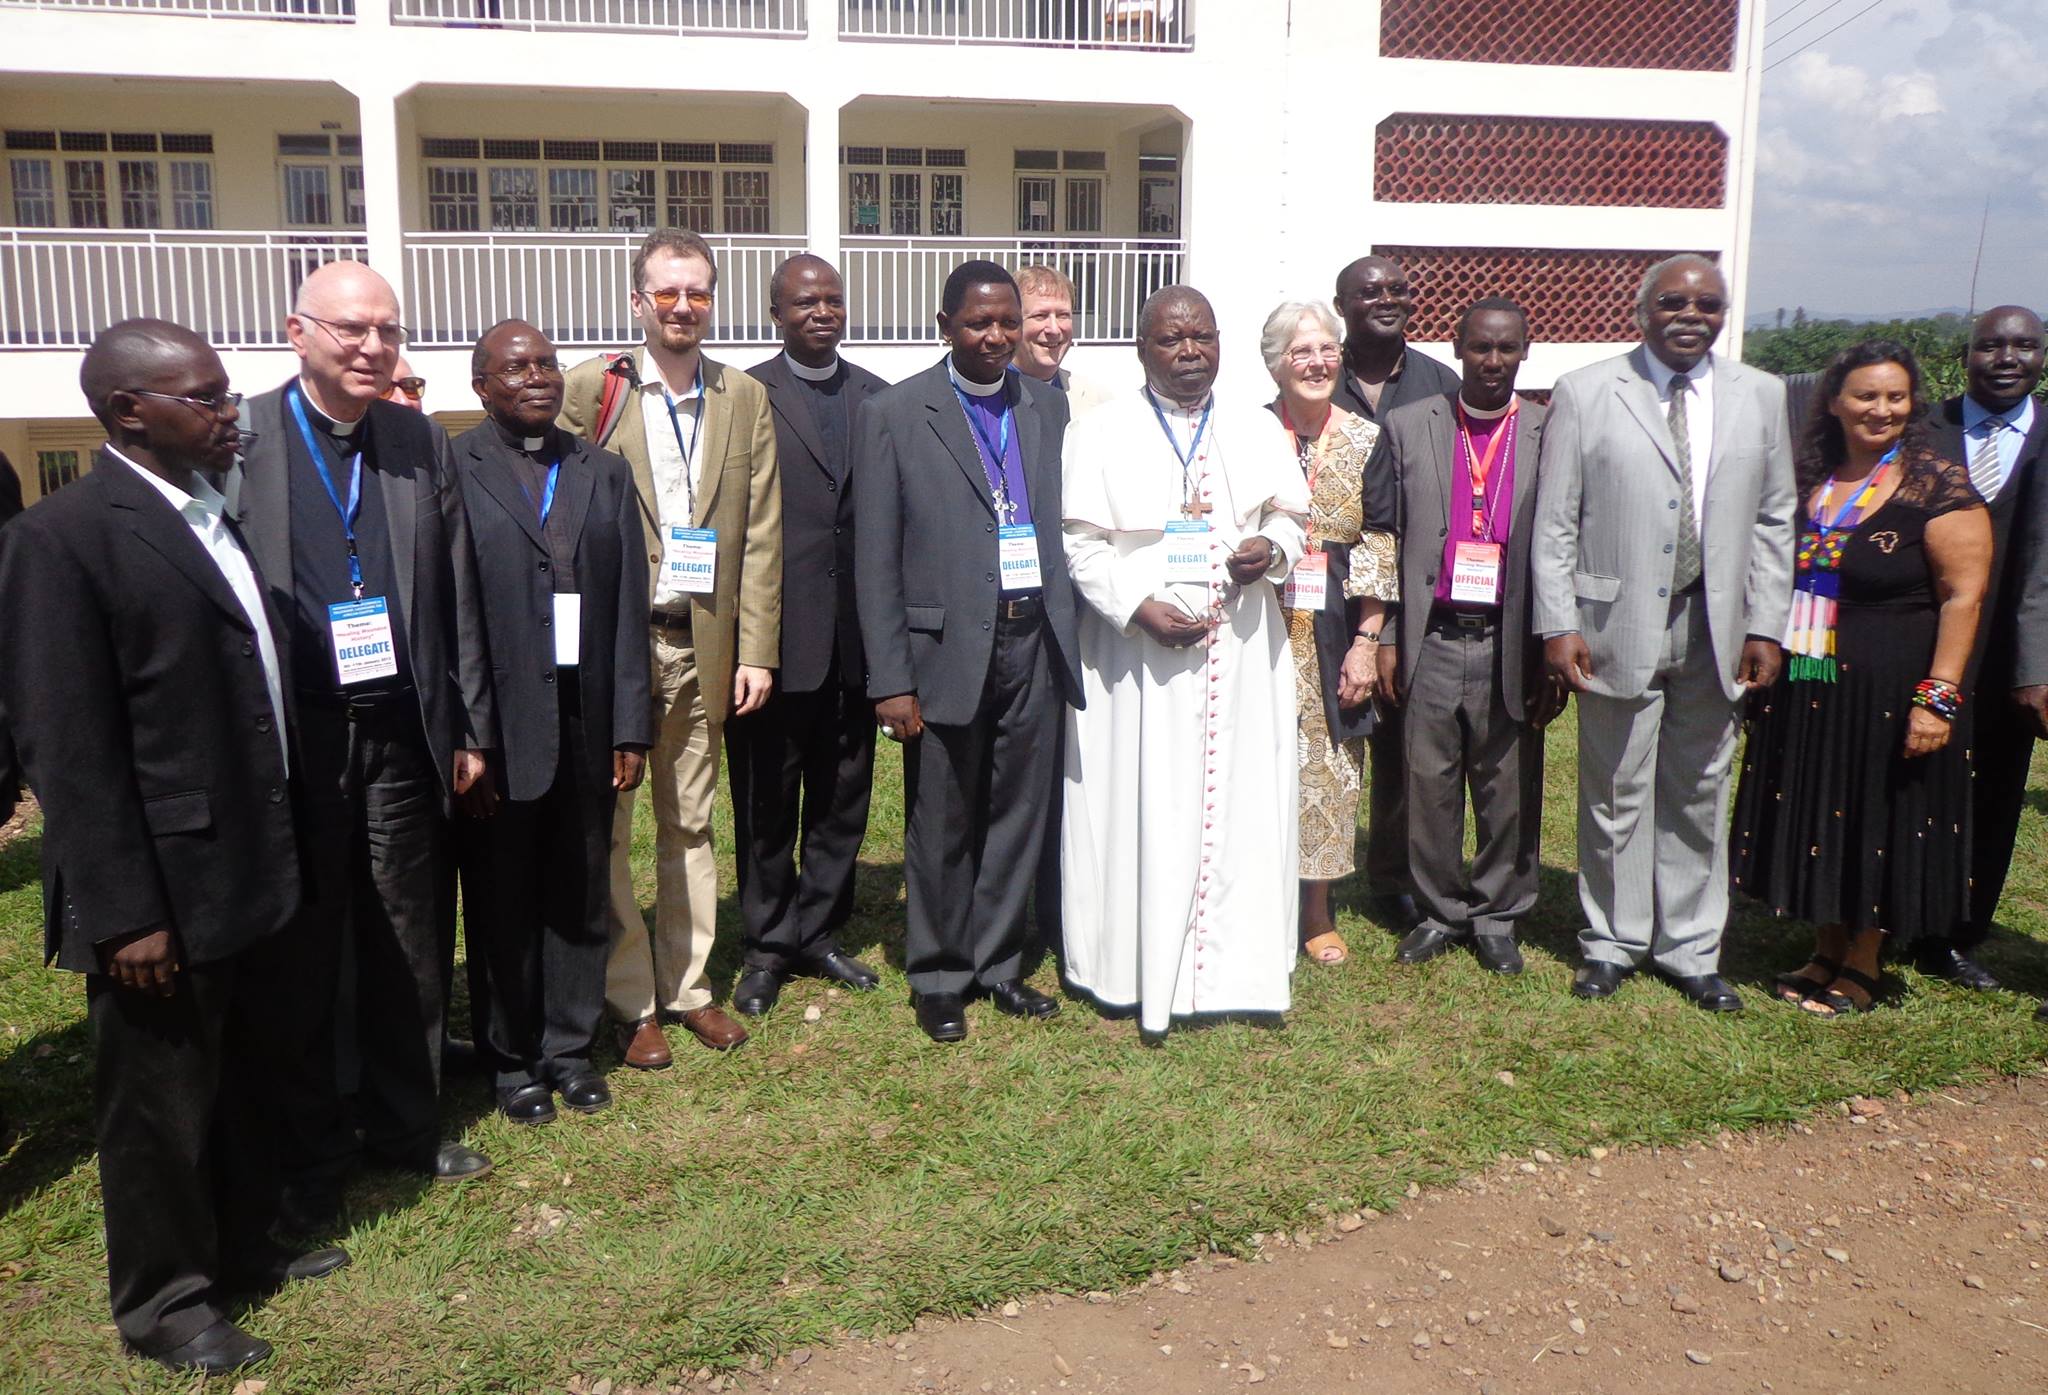 A group photo of the first Iinternational Ecumenical Fellowship conference attendees at Bishop Stuart University